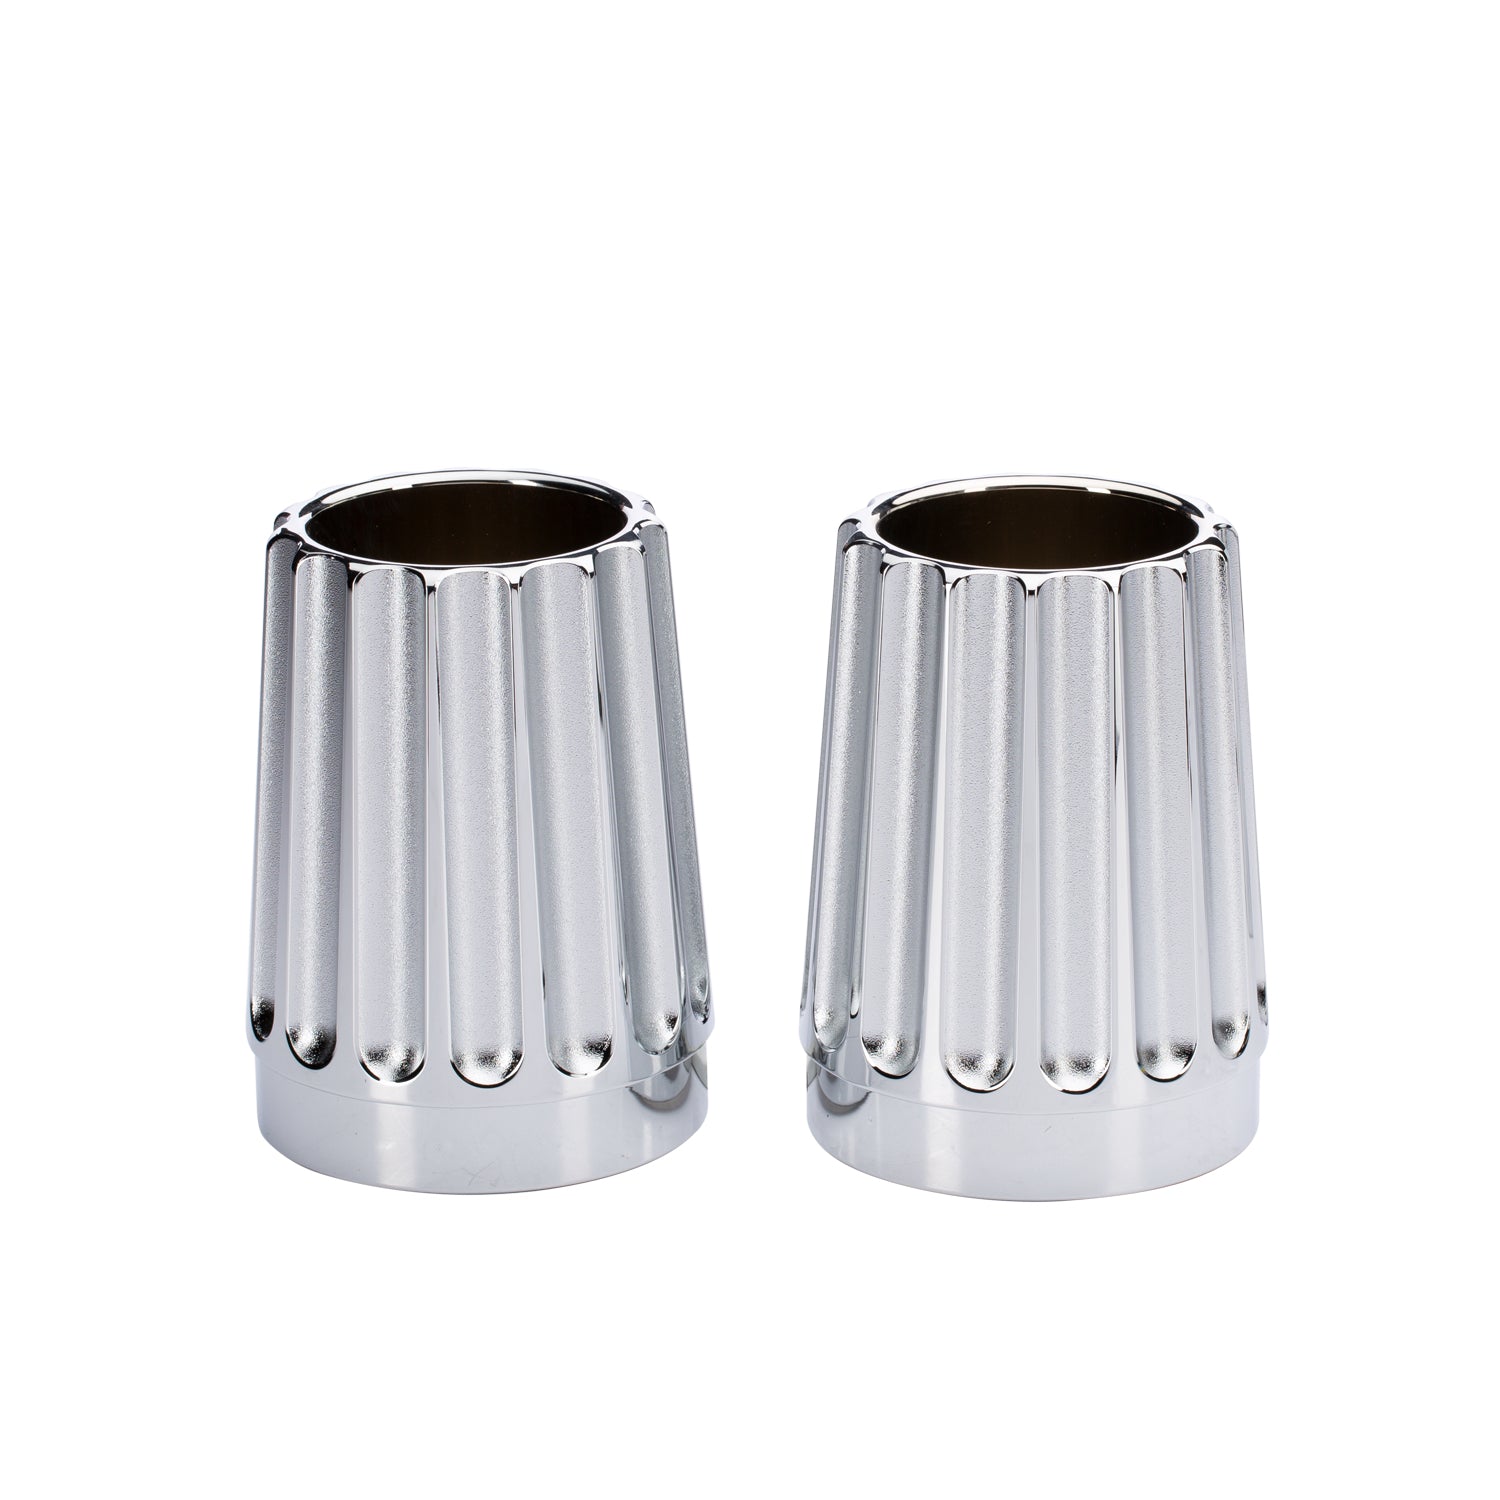 Grooved Exhaust Tips in Chrome, Pair